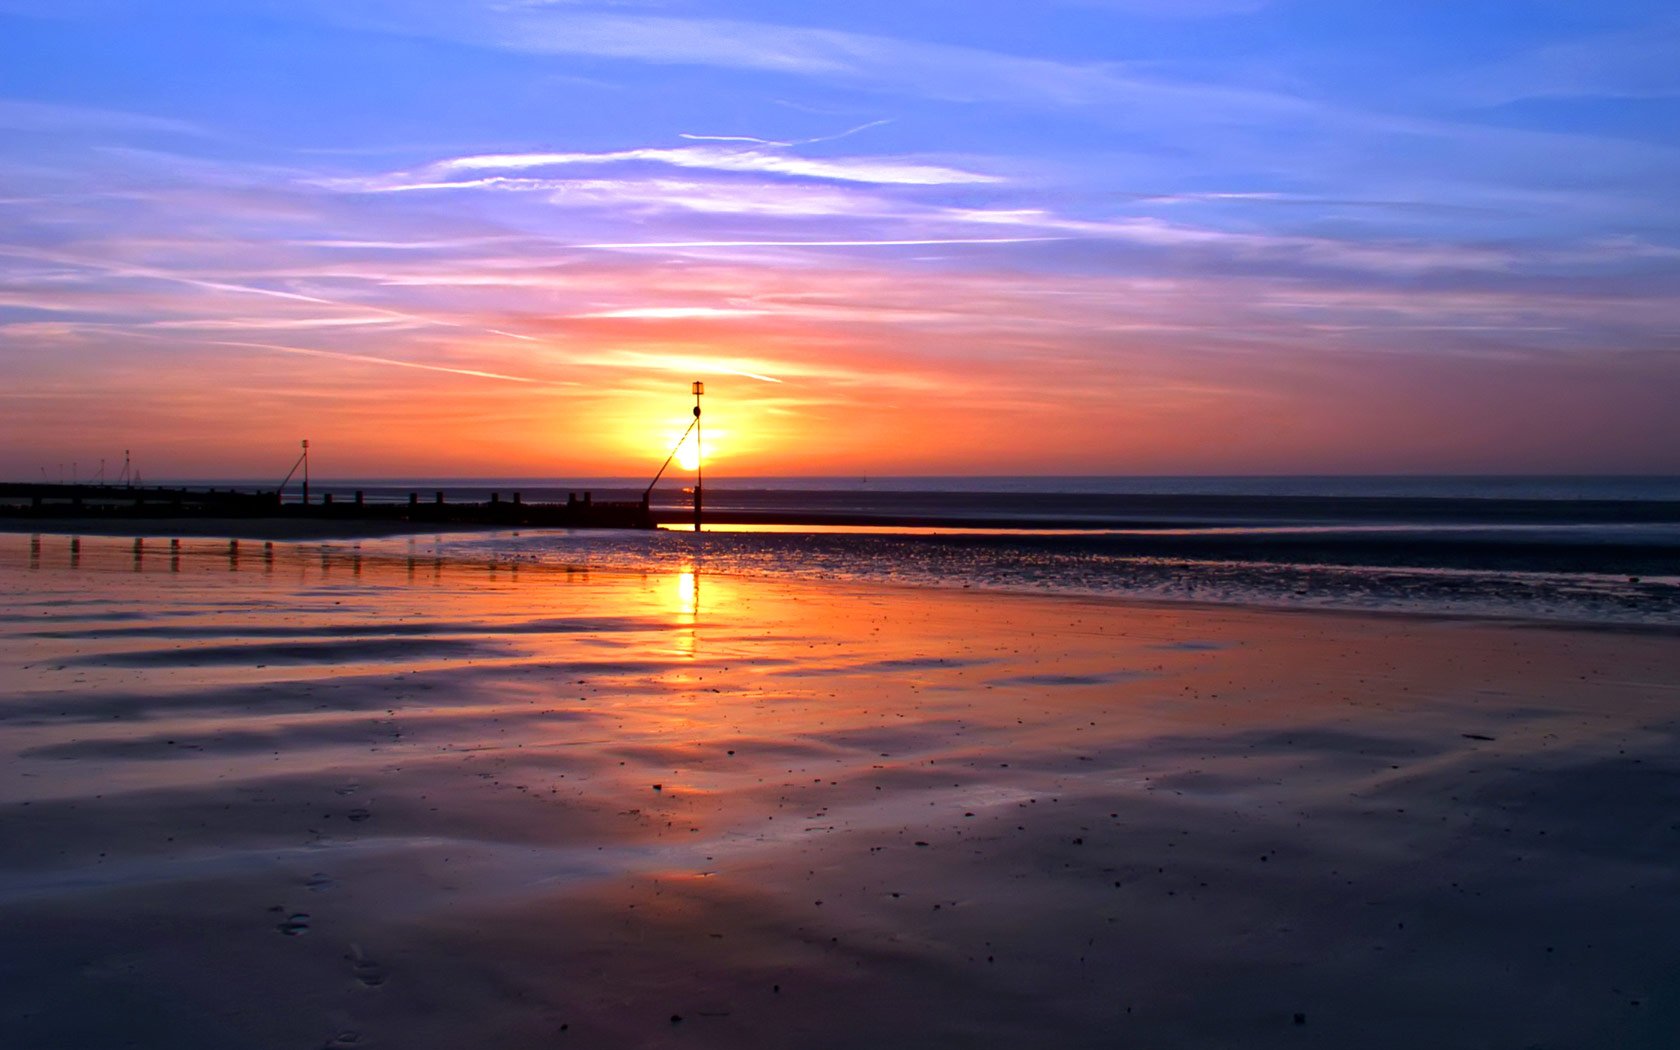 Sunset On The Beach 11341 Hd Wallpapers in Beach   Imagescicom